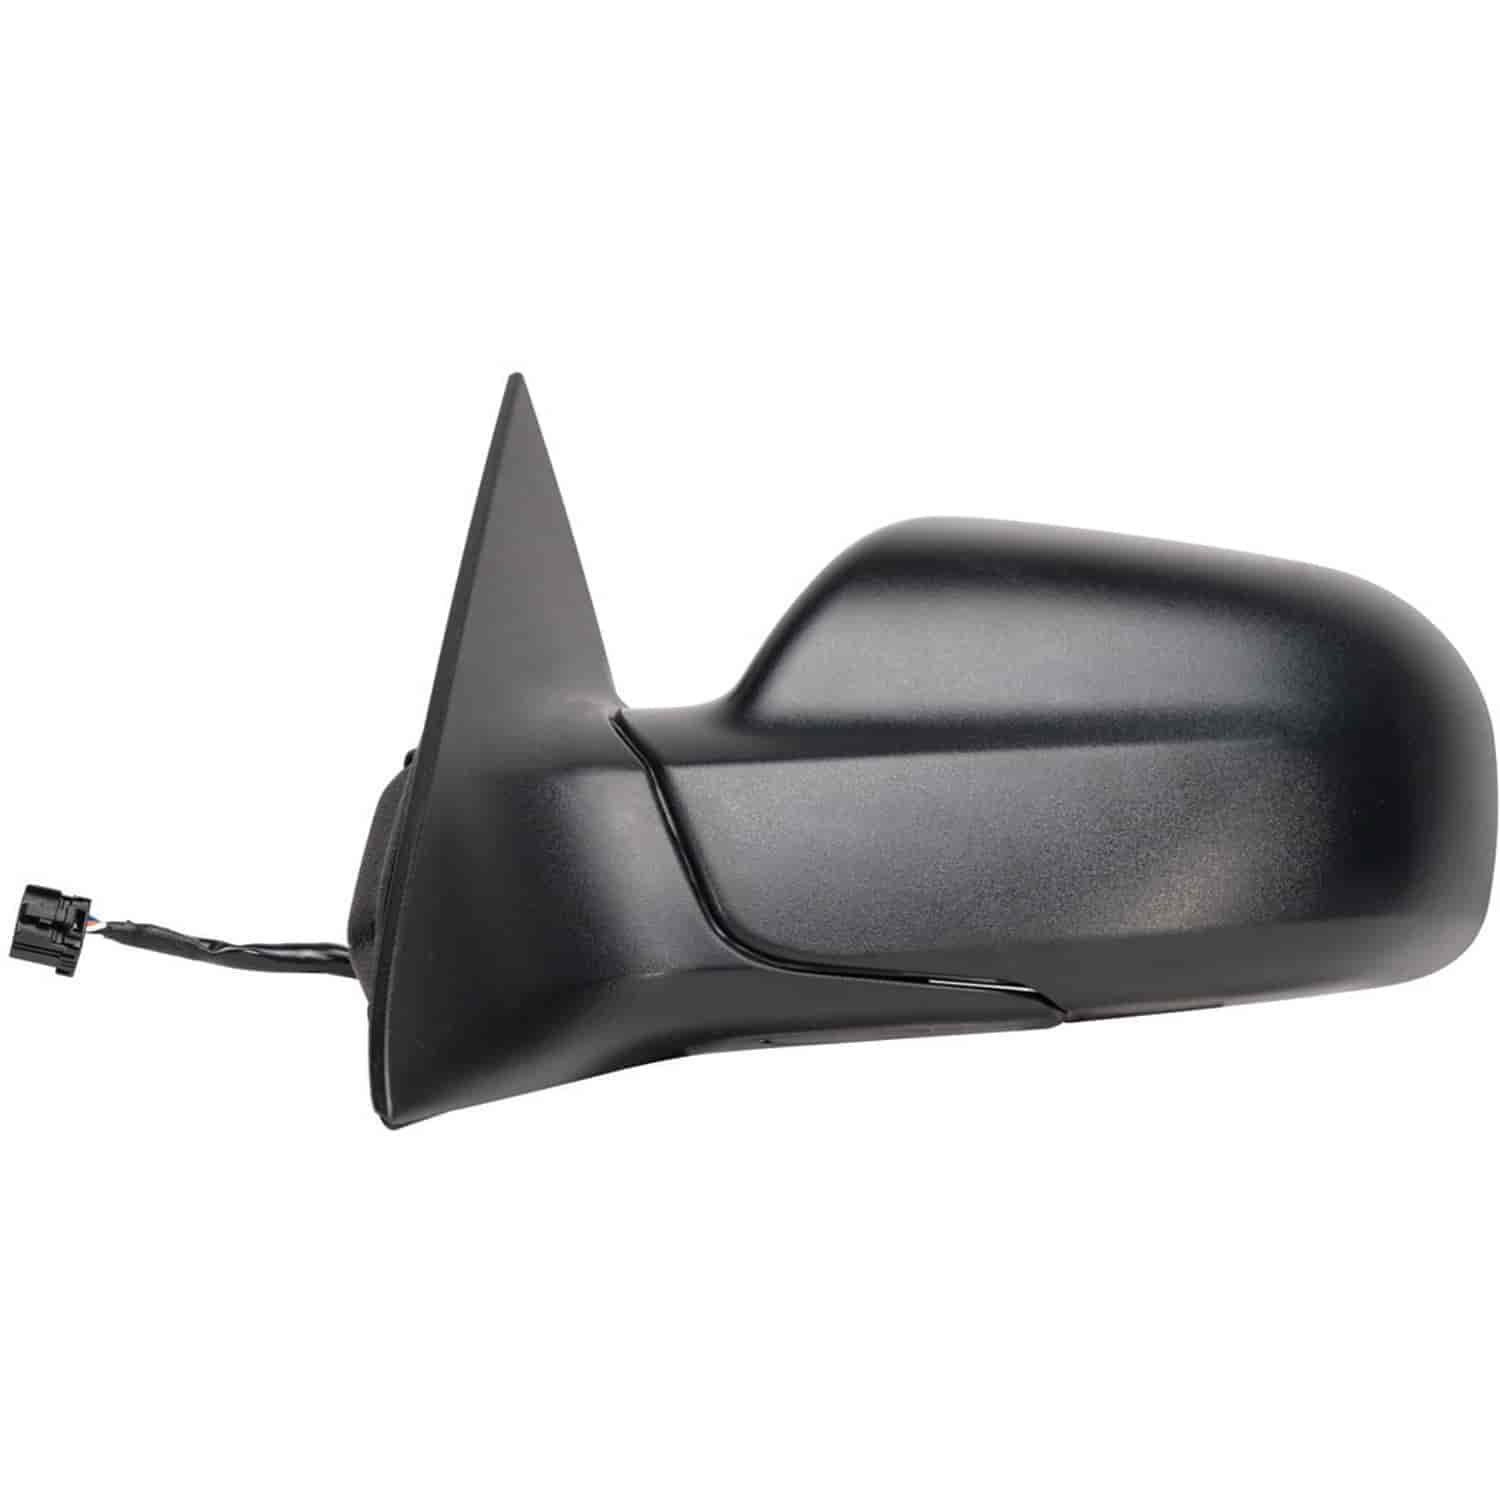 OEM Style Replacement mirror for 04-05 Chrysler Pacifica w/o dimming driver side mirror tested to fi